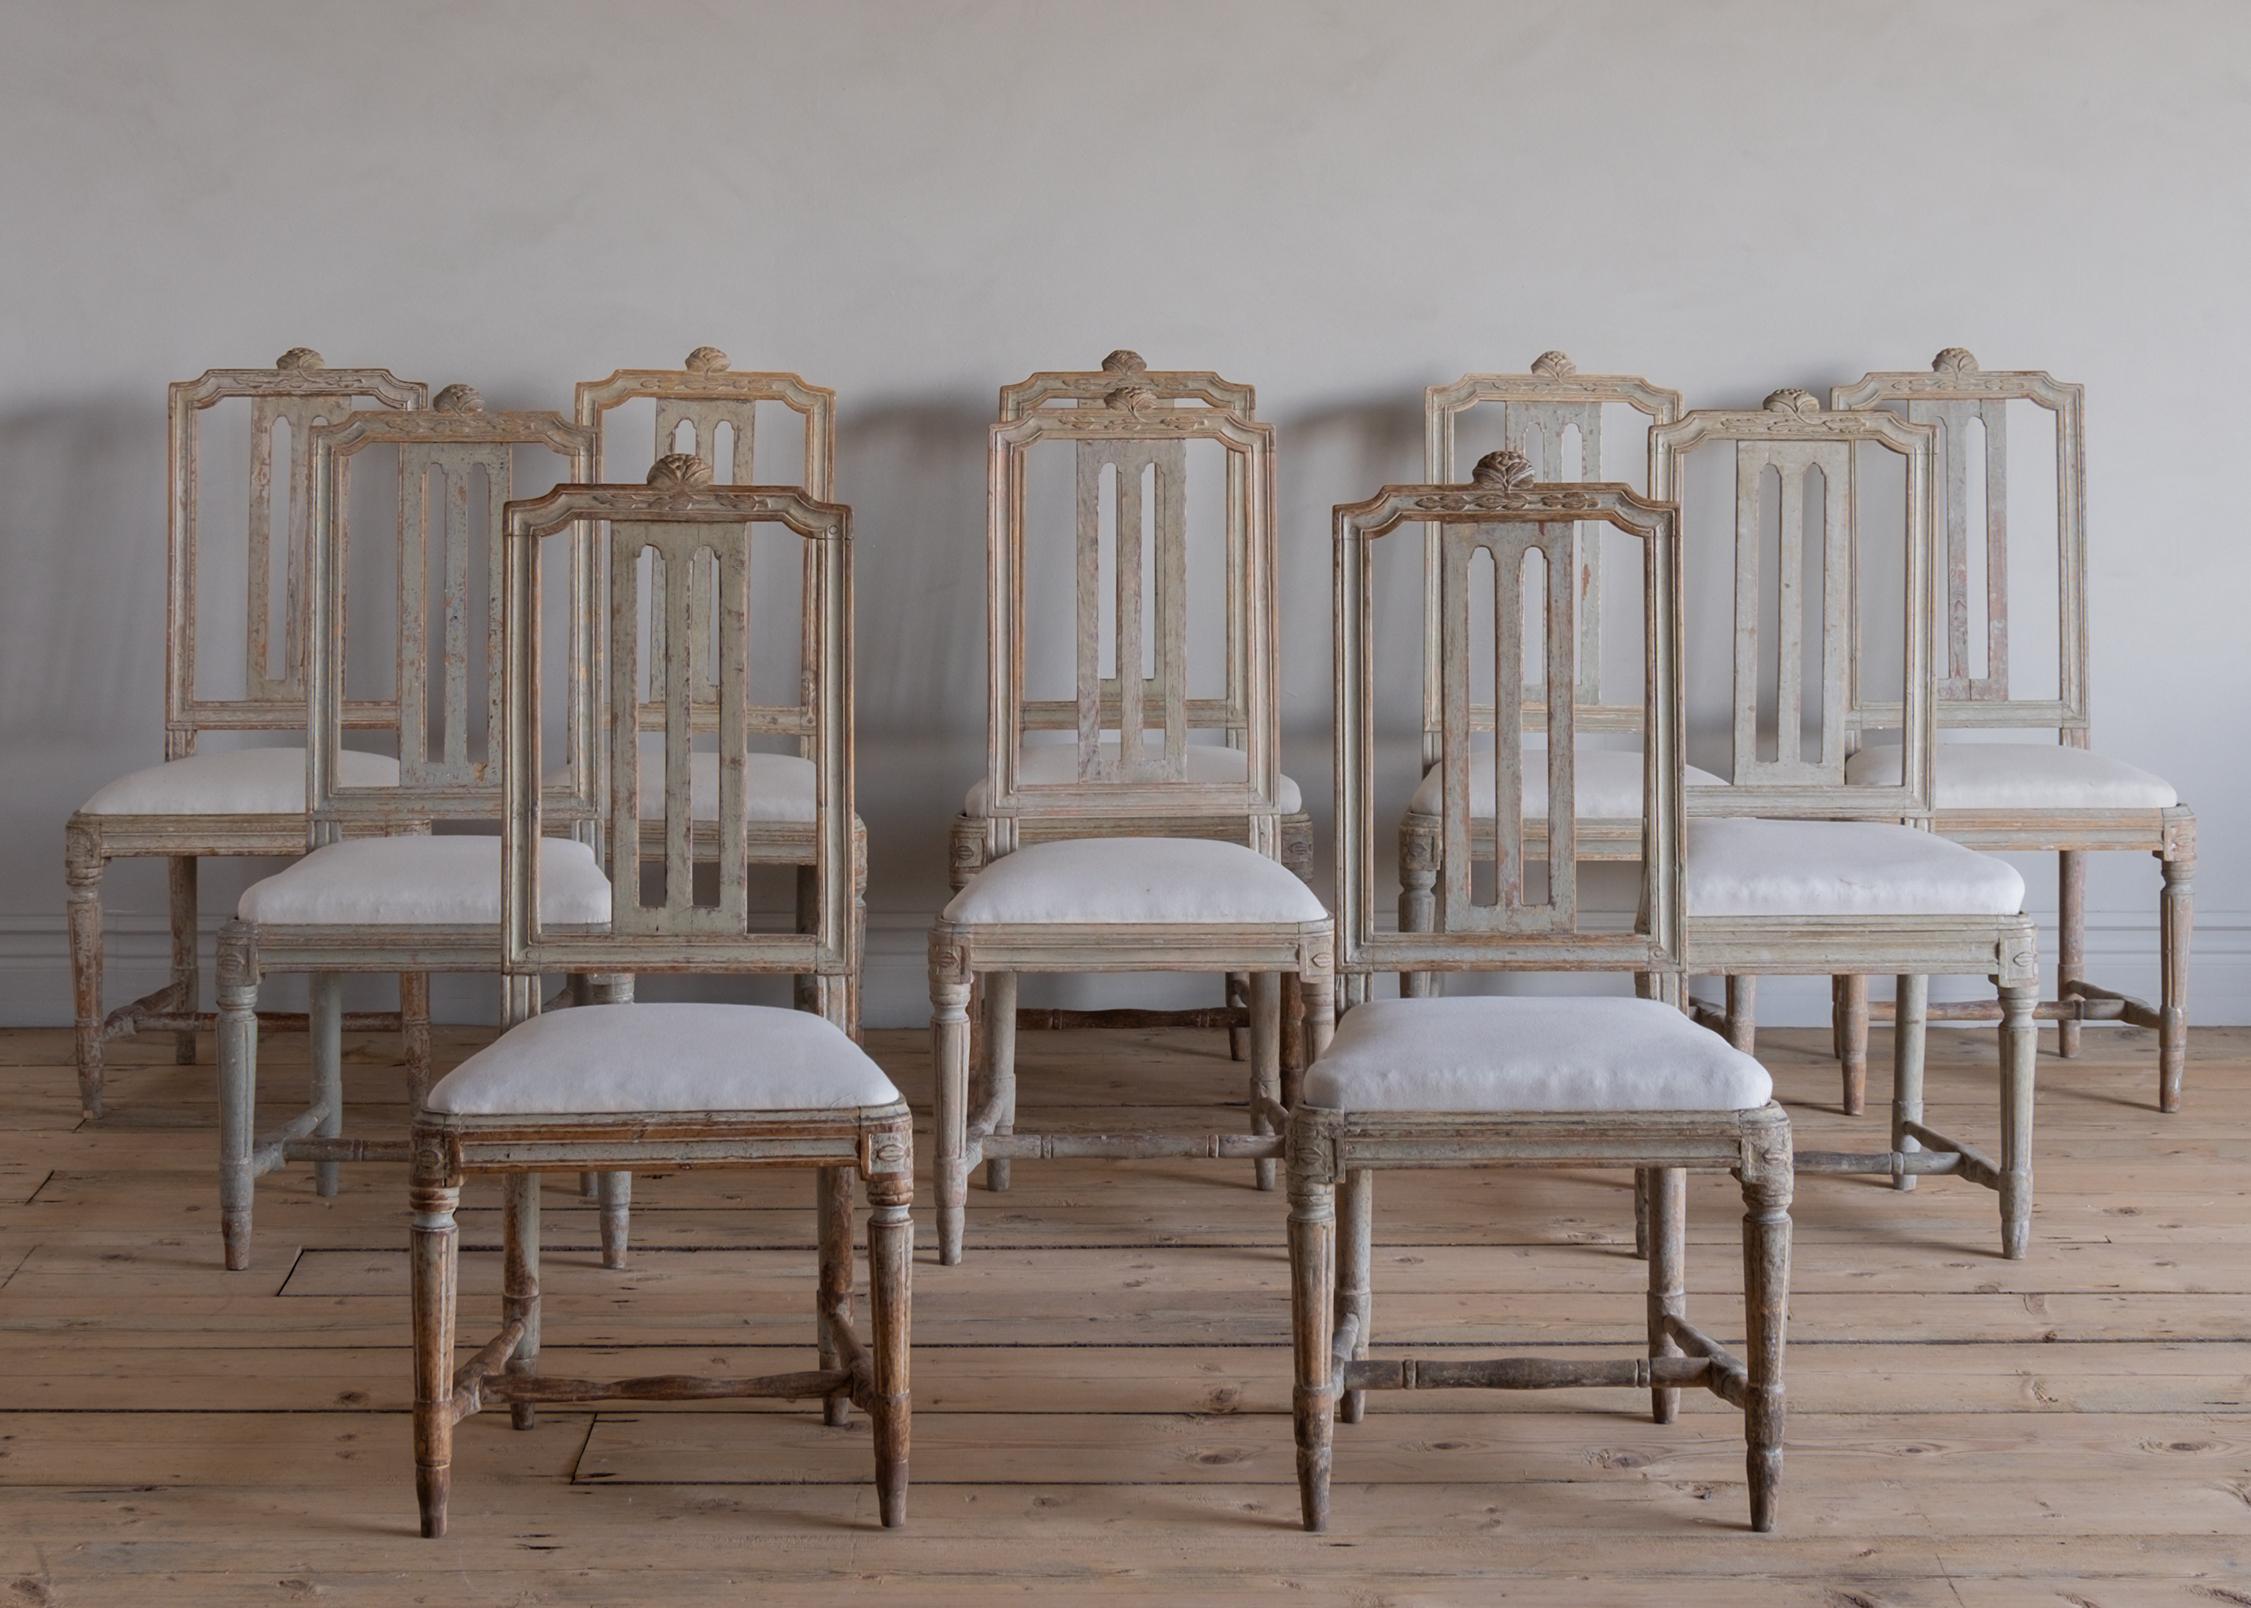 An exceptional set of ten 18th century Gustavian dining chairs in original color with a great patinated surface, circa 1790, Stockholm, Sweden. 

Very good condition with wear consistent with age and use. A detailed condition report is available